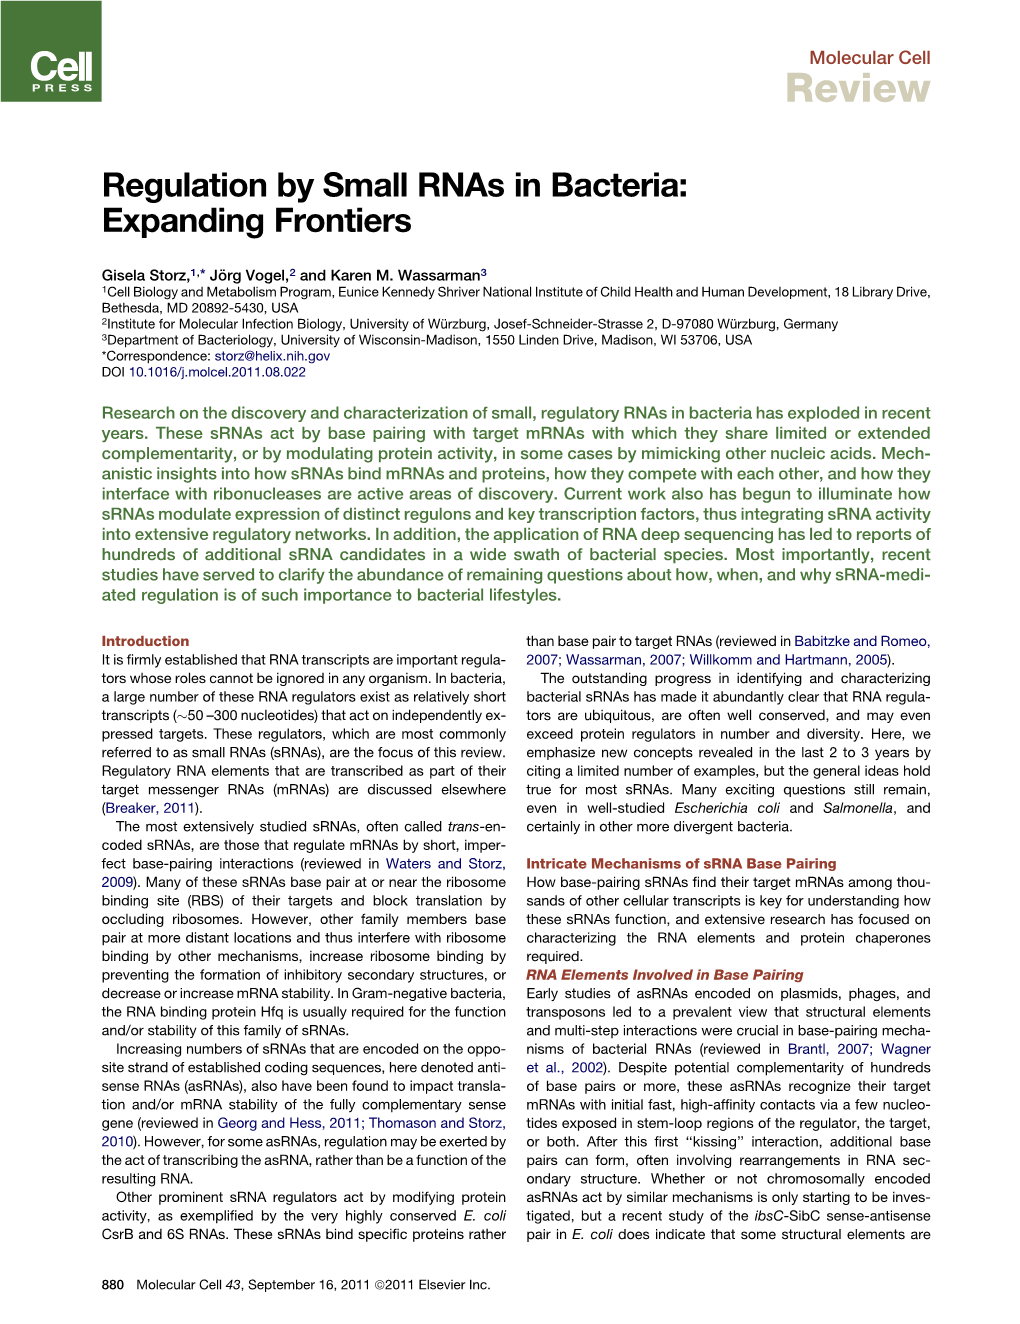 Regulation by Small Rnas in Bacteria: Expanding Frontiers